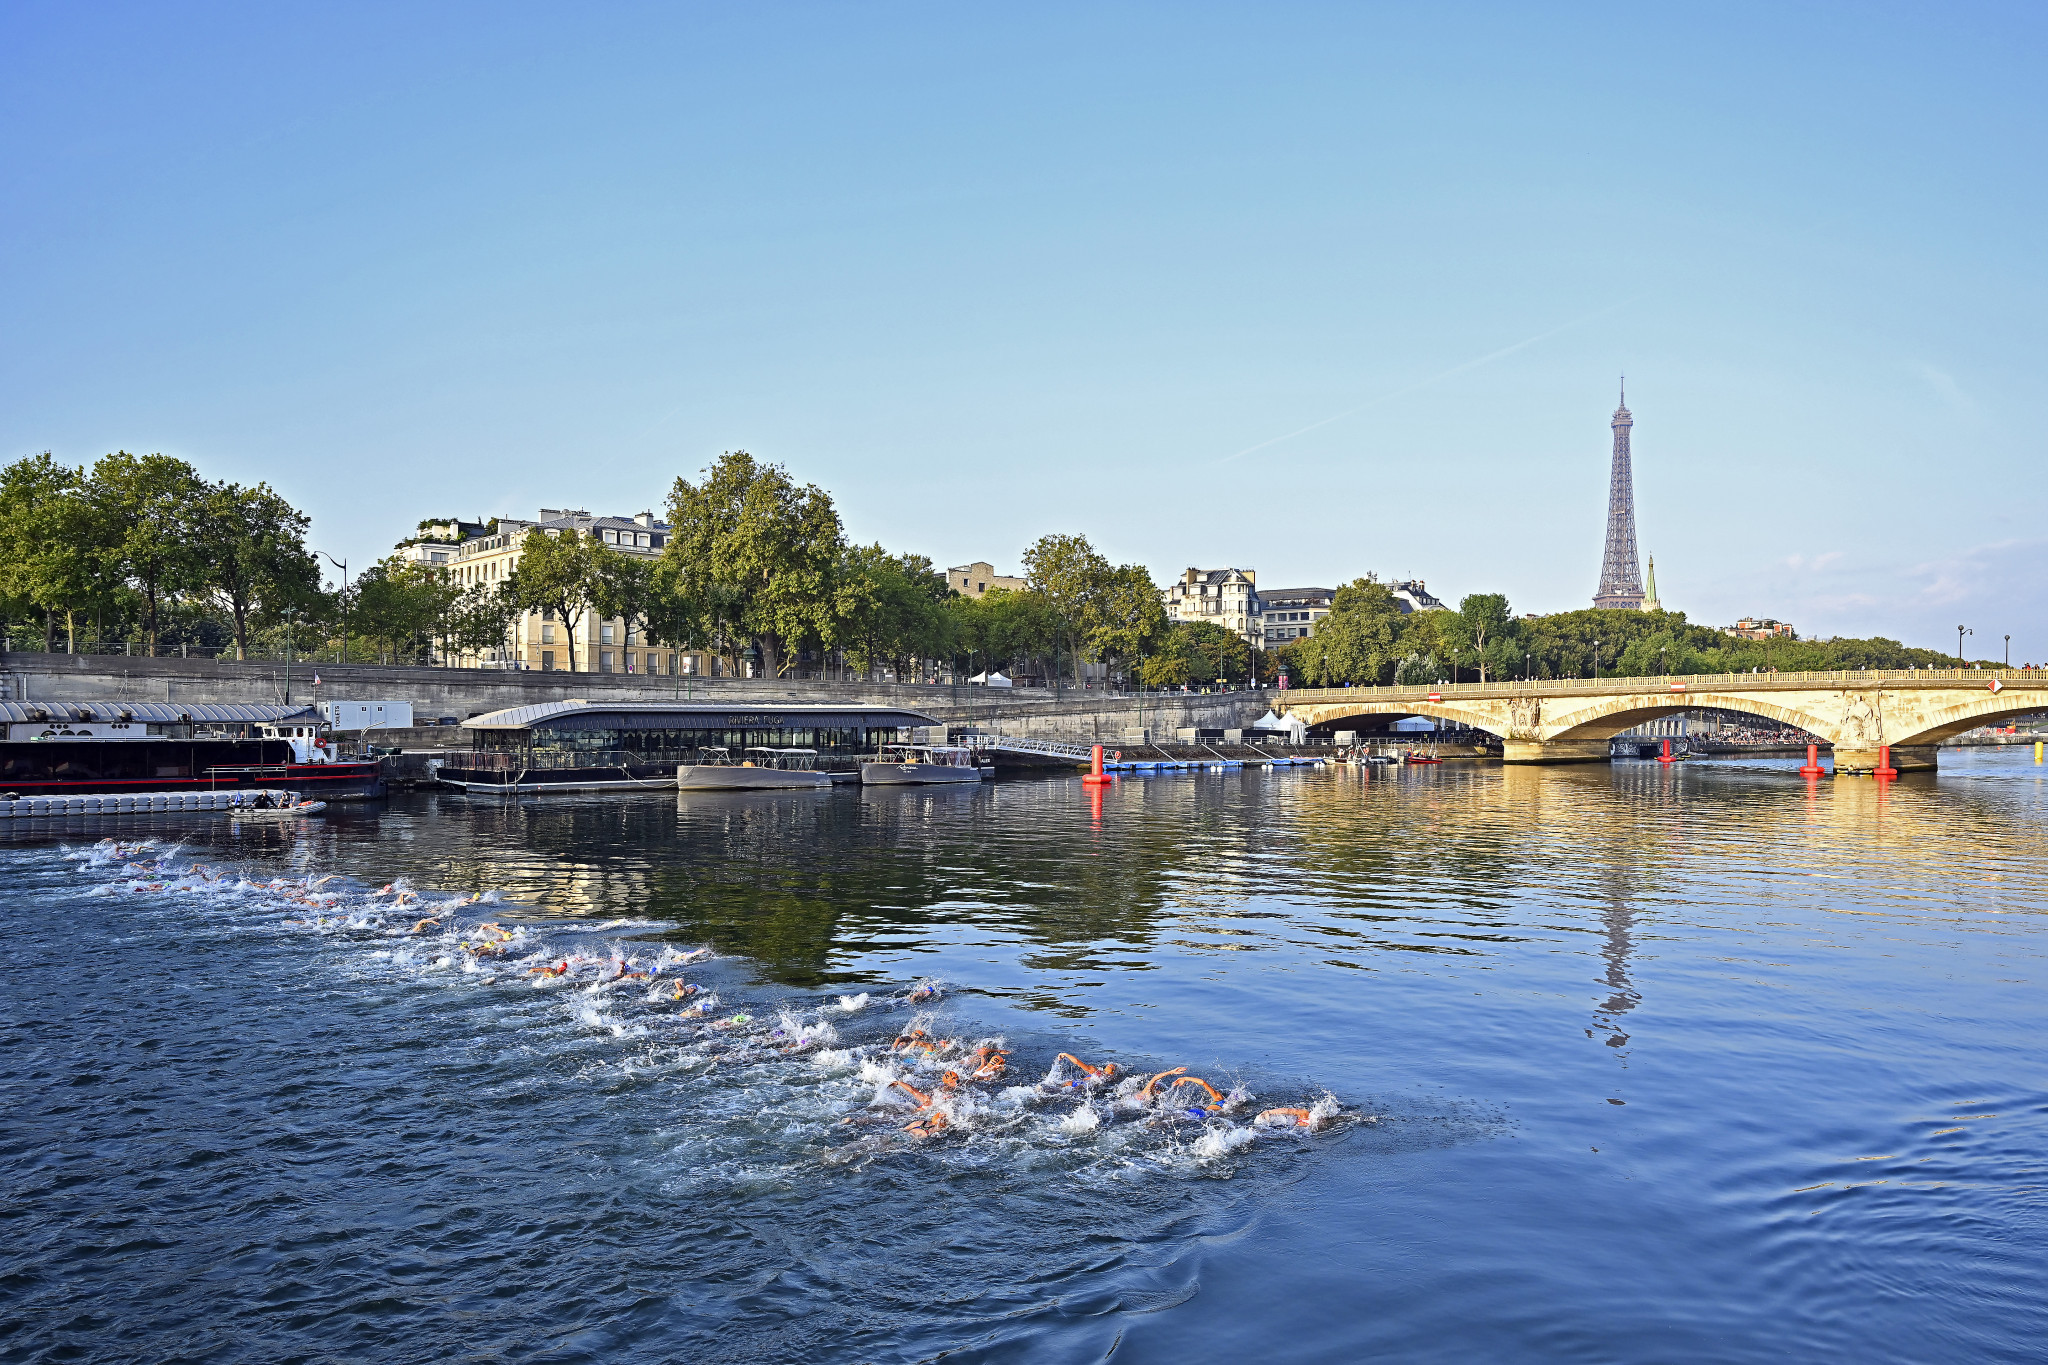 World Triathlon President Marisol Casado insisted she is "completely confident" the River Seine can be used at the Paris 2024 Olympics ©Getty Images